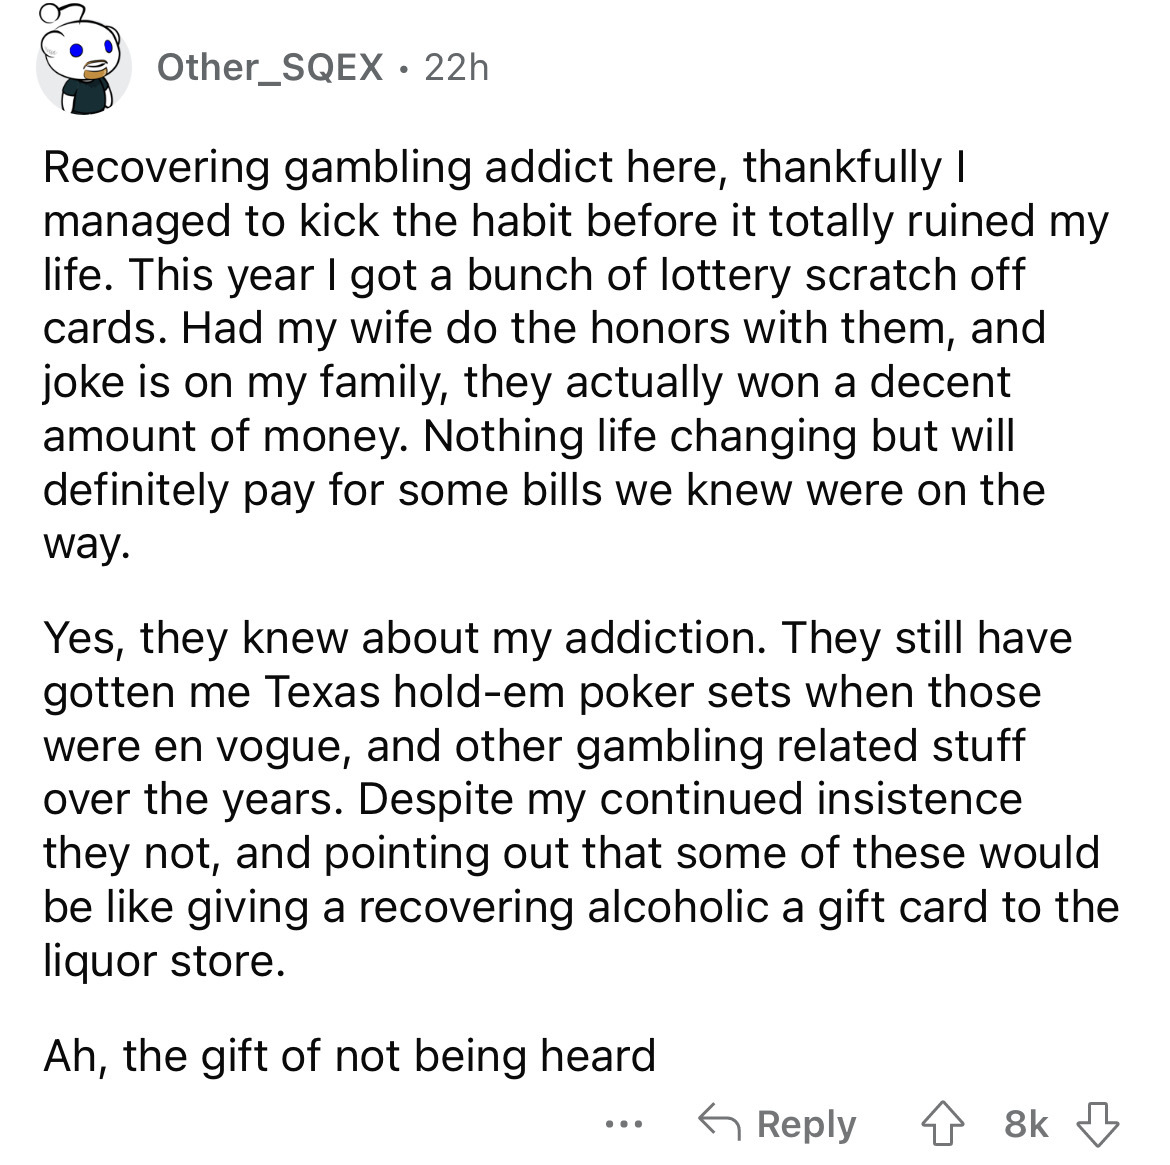 write an email to a friend about your weekend - Other_SQEX 22h Recovering gambling addict here, thankfully I managed to kick the habit before it totally ruined my life. This year I got a bunch of lottery scratch off cards. Had my wife do the honors with t